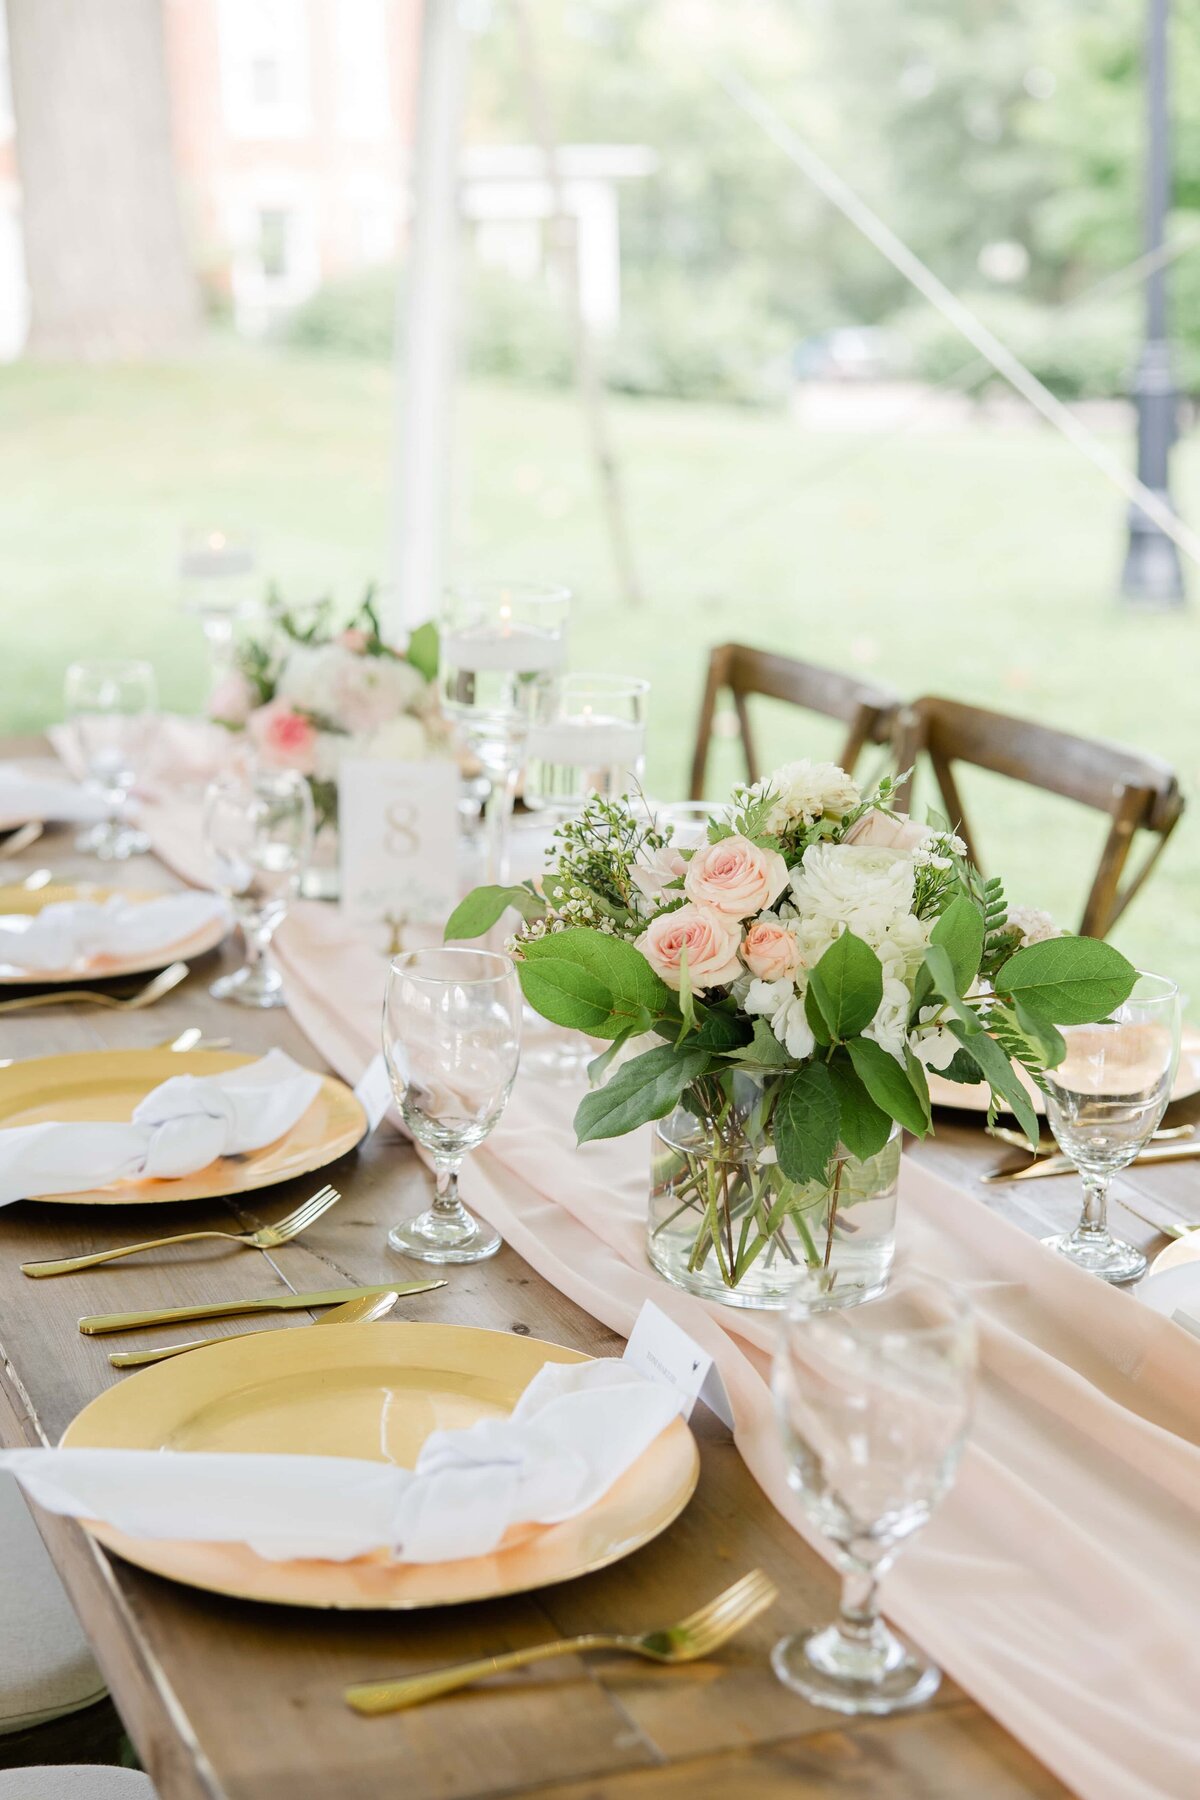 Elegant outdoor wedding table setting with gold plates, floral centerpieces, and crystal glassware arranged on a wooden table at an Iowa winery.